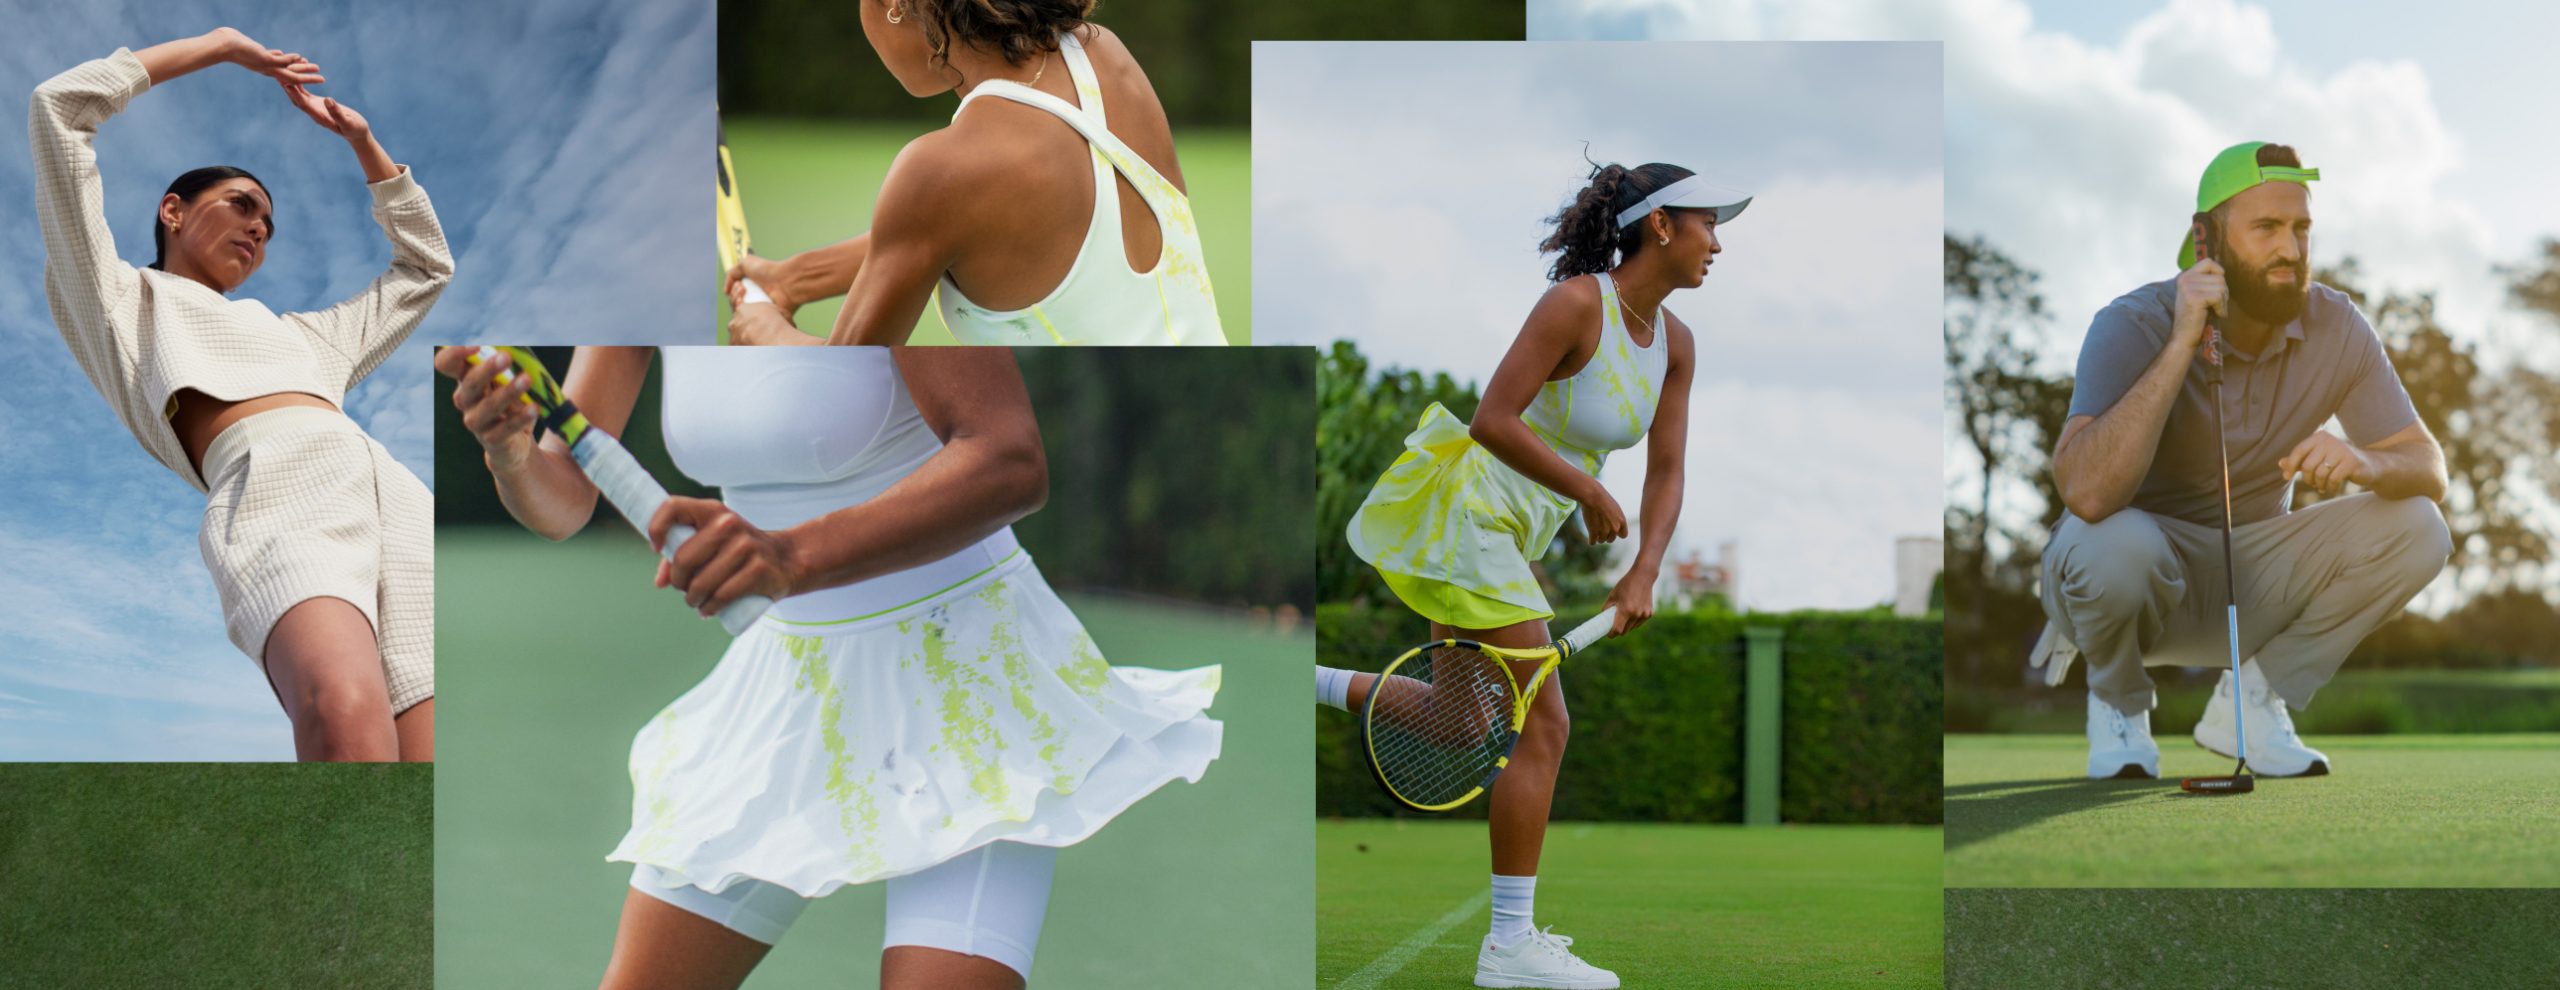 Lululemon Gears Us Up With Tennis And Golf Sportswear Collections For Spring